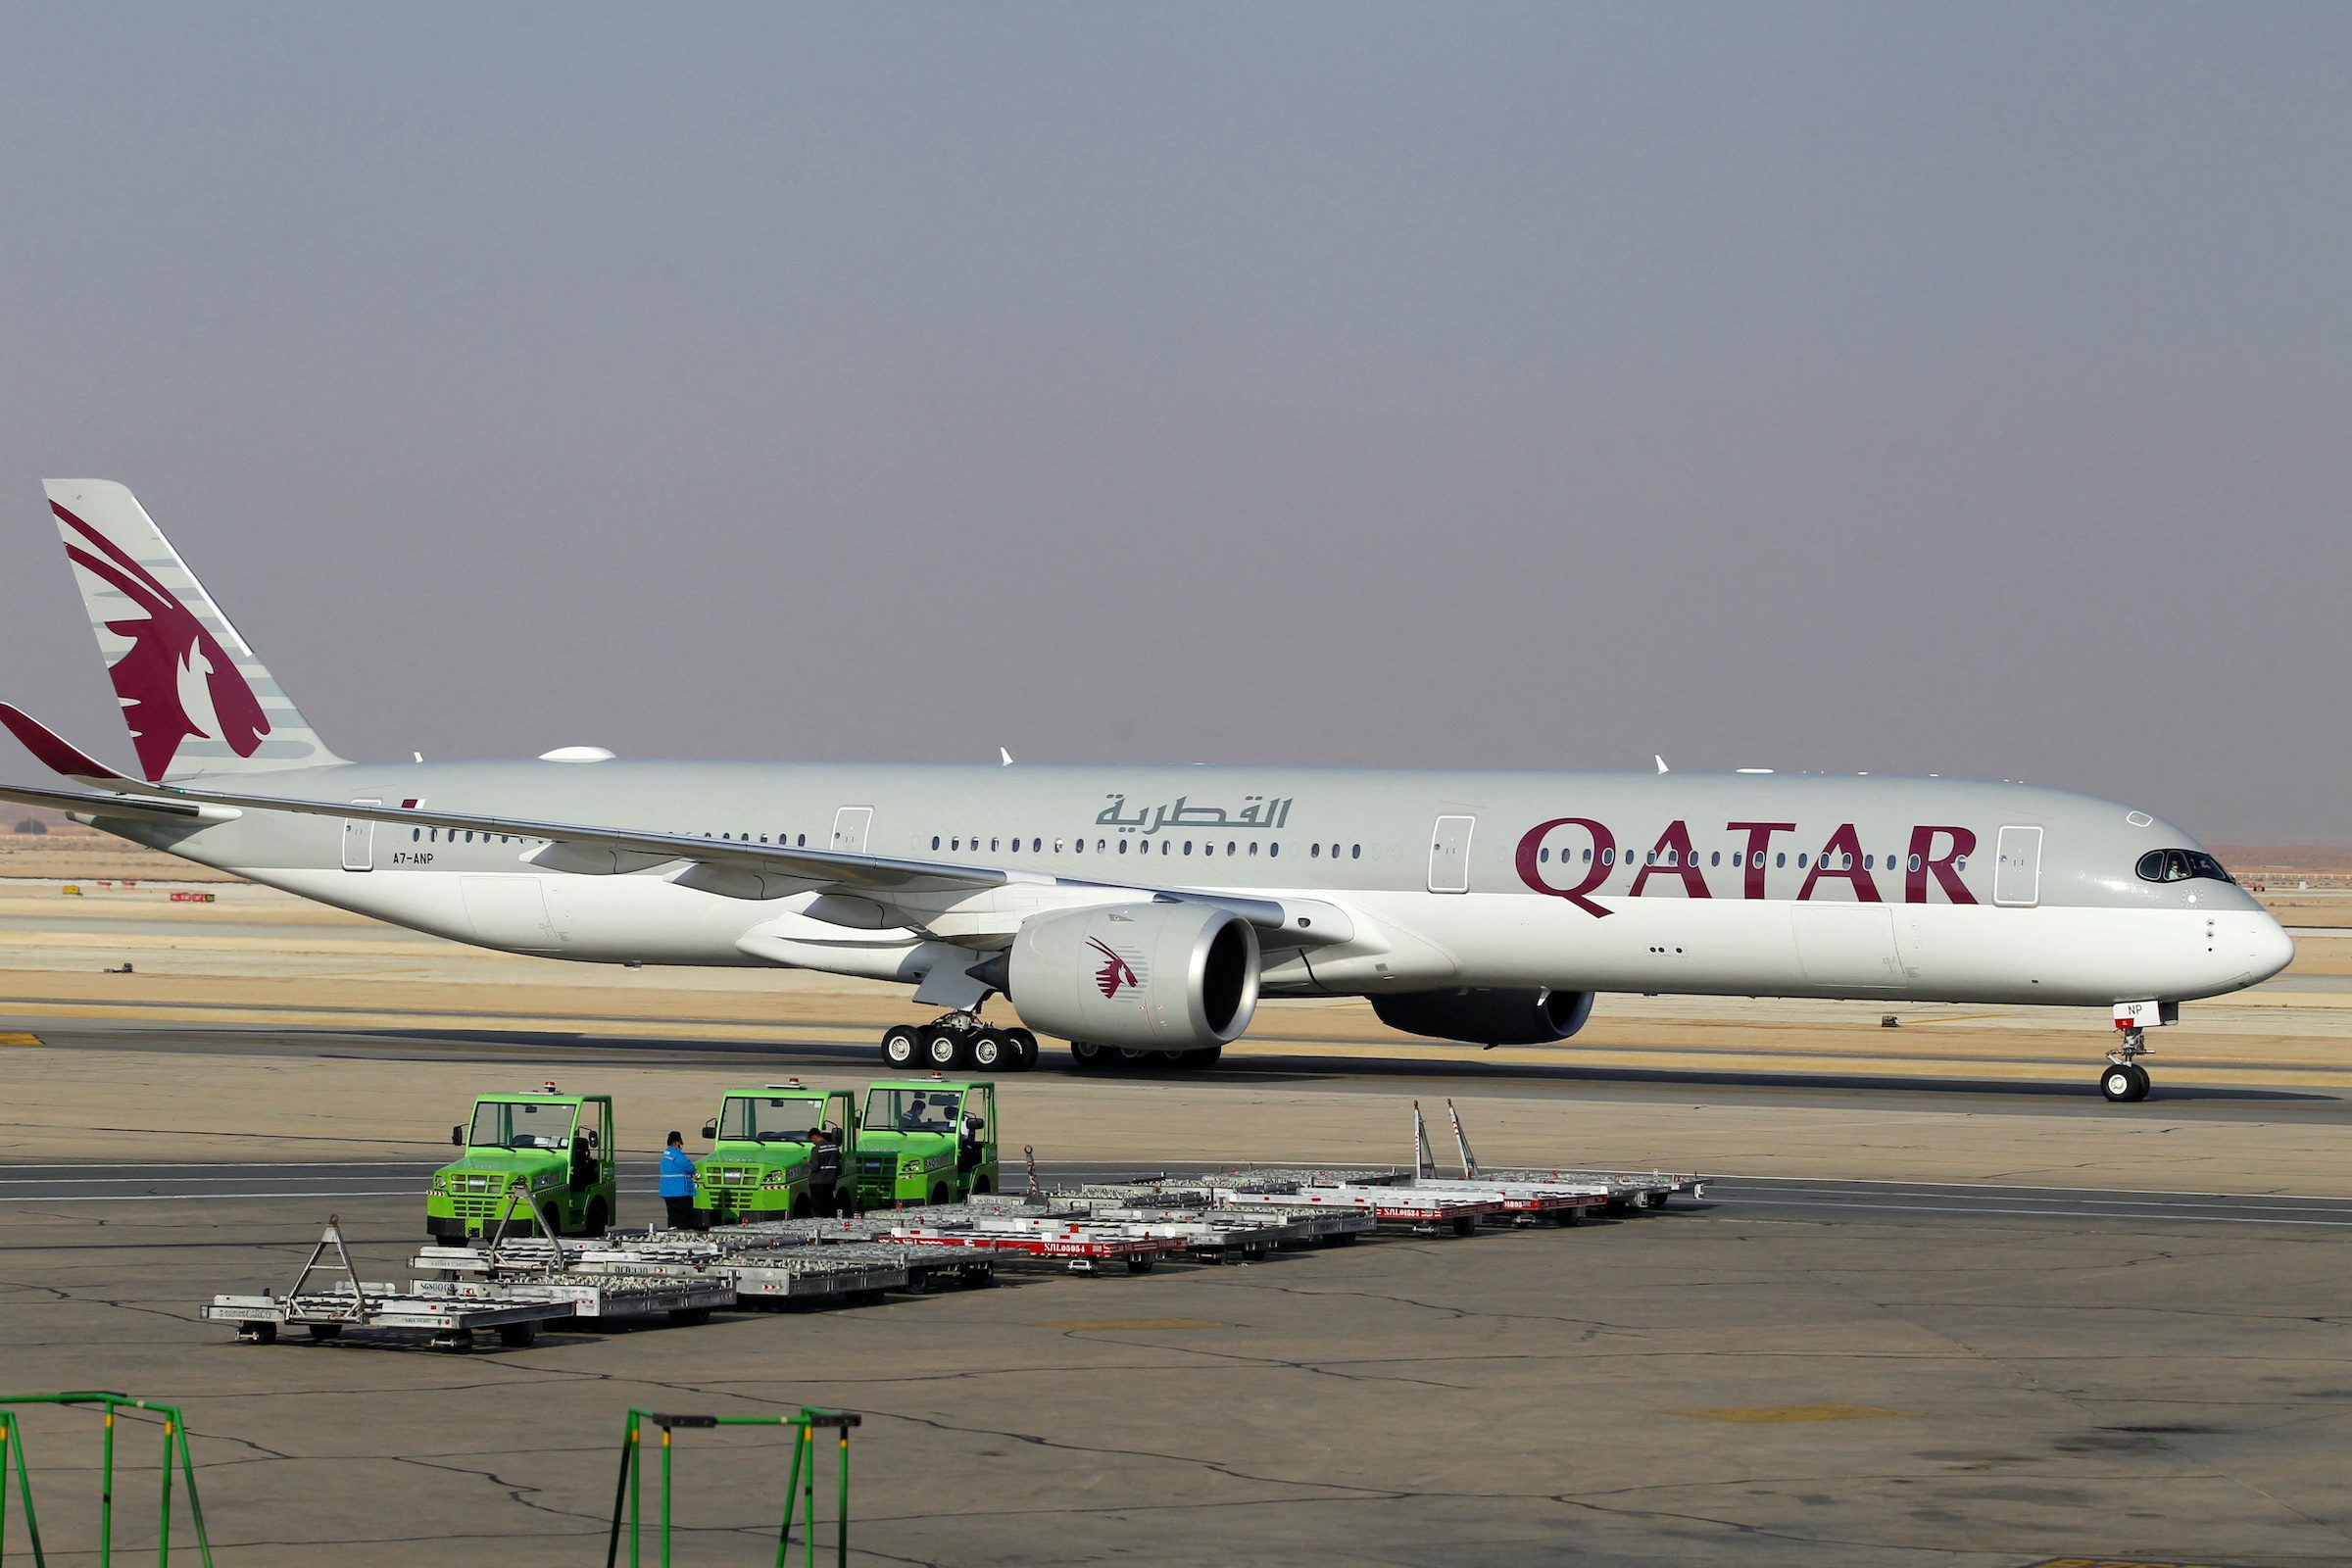 Qatar Airways suffers setback in feud with Airbus